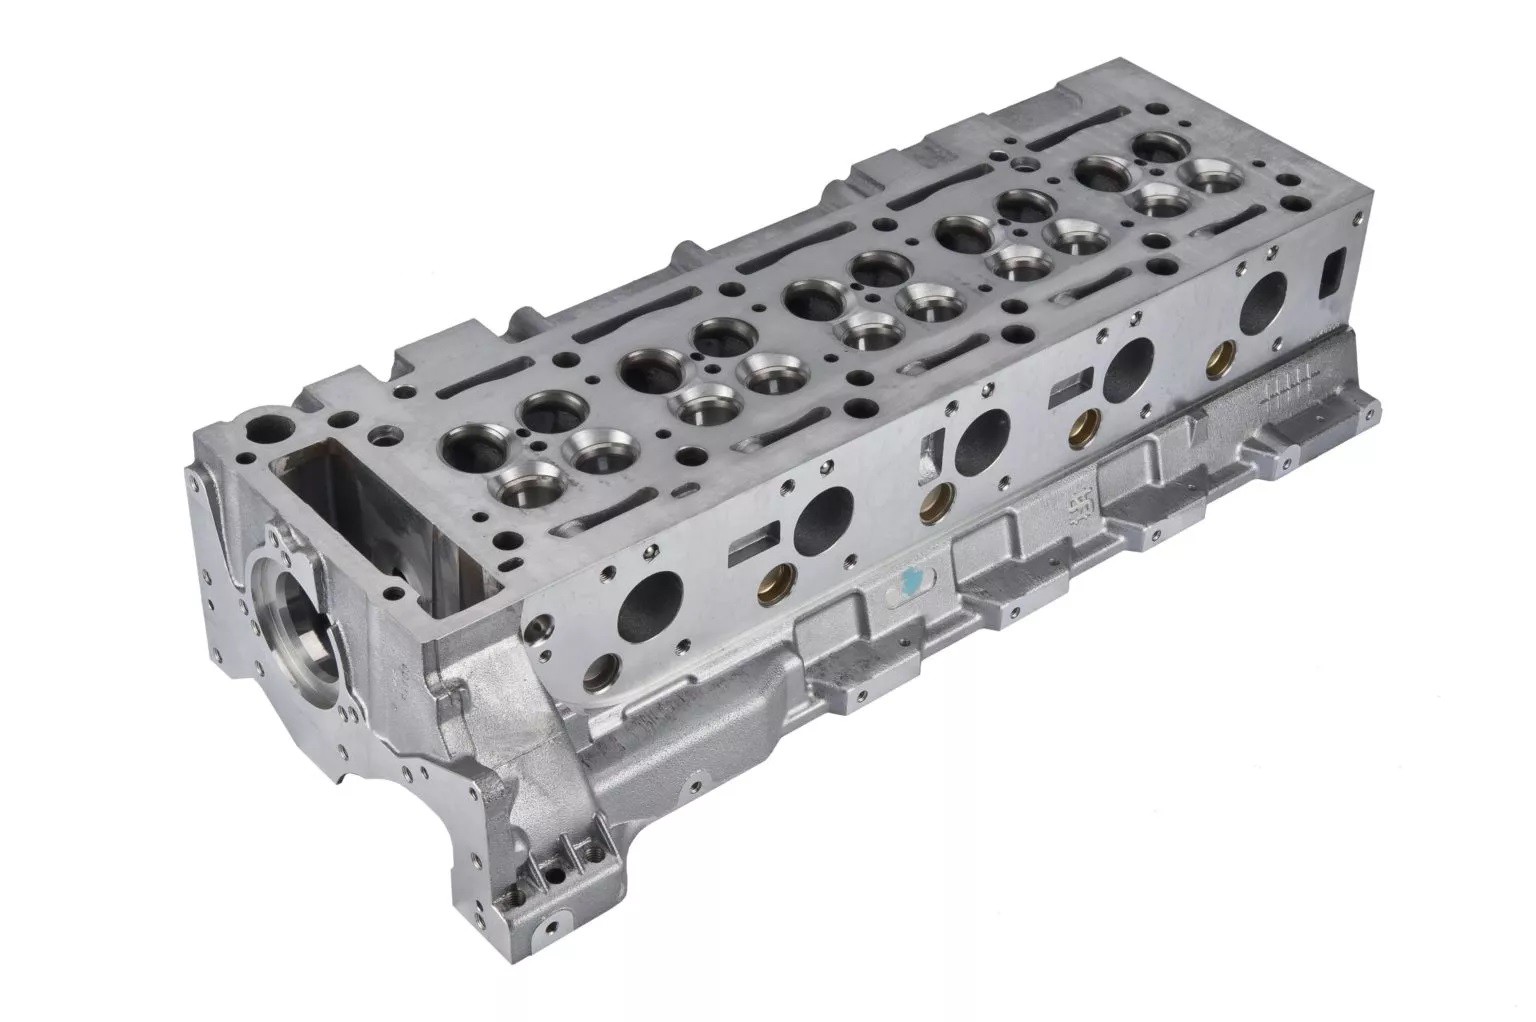 5 Causes and Symptoms of a Cracked Cylinder Head